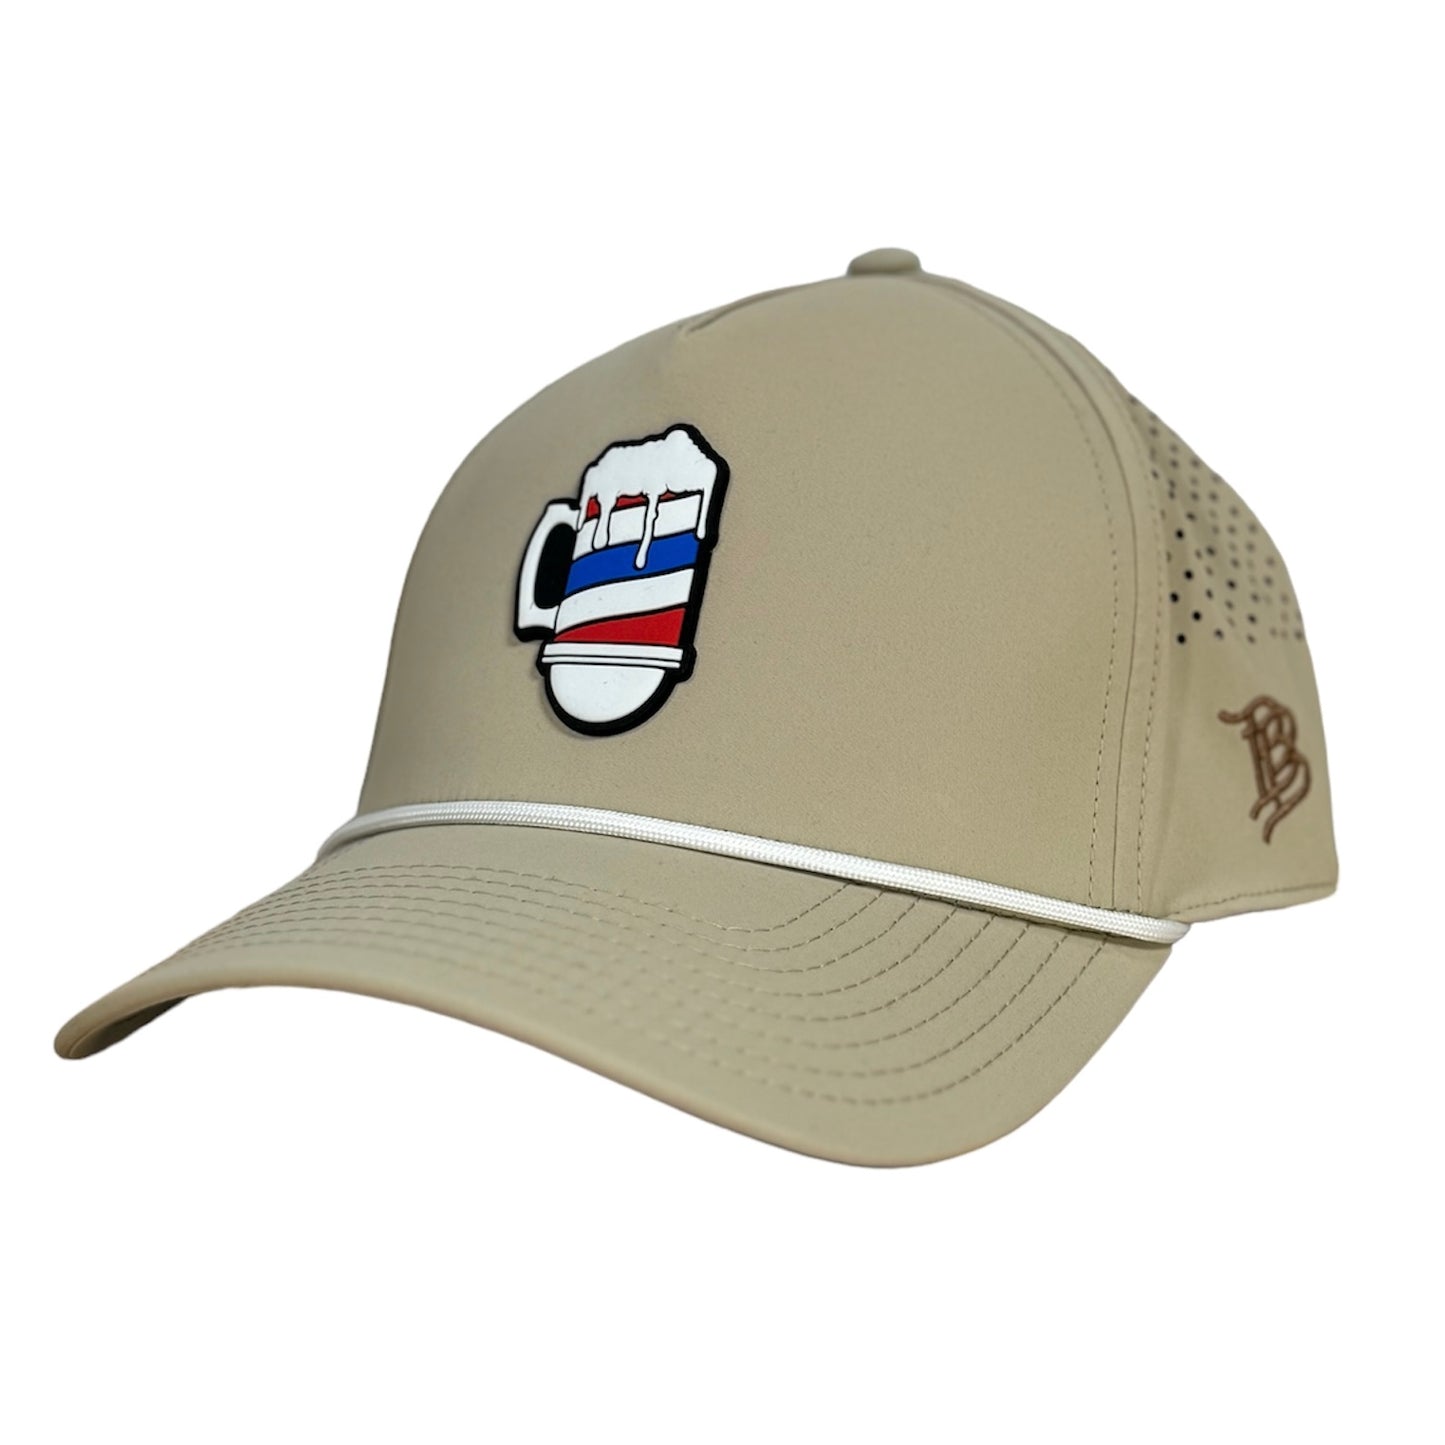 BARBER BEER POLE PVC CURVED 5 PANEL PERFORMANCE TAN